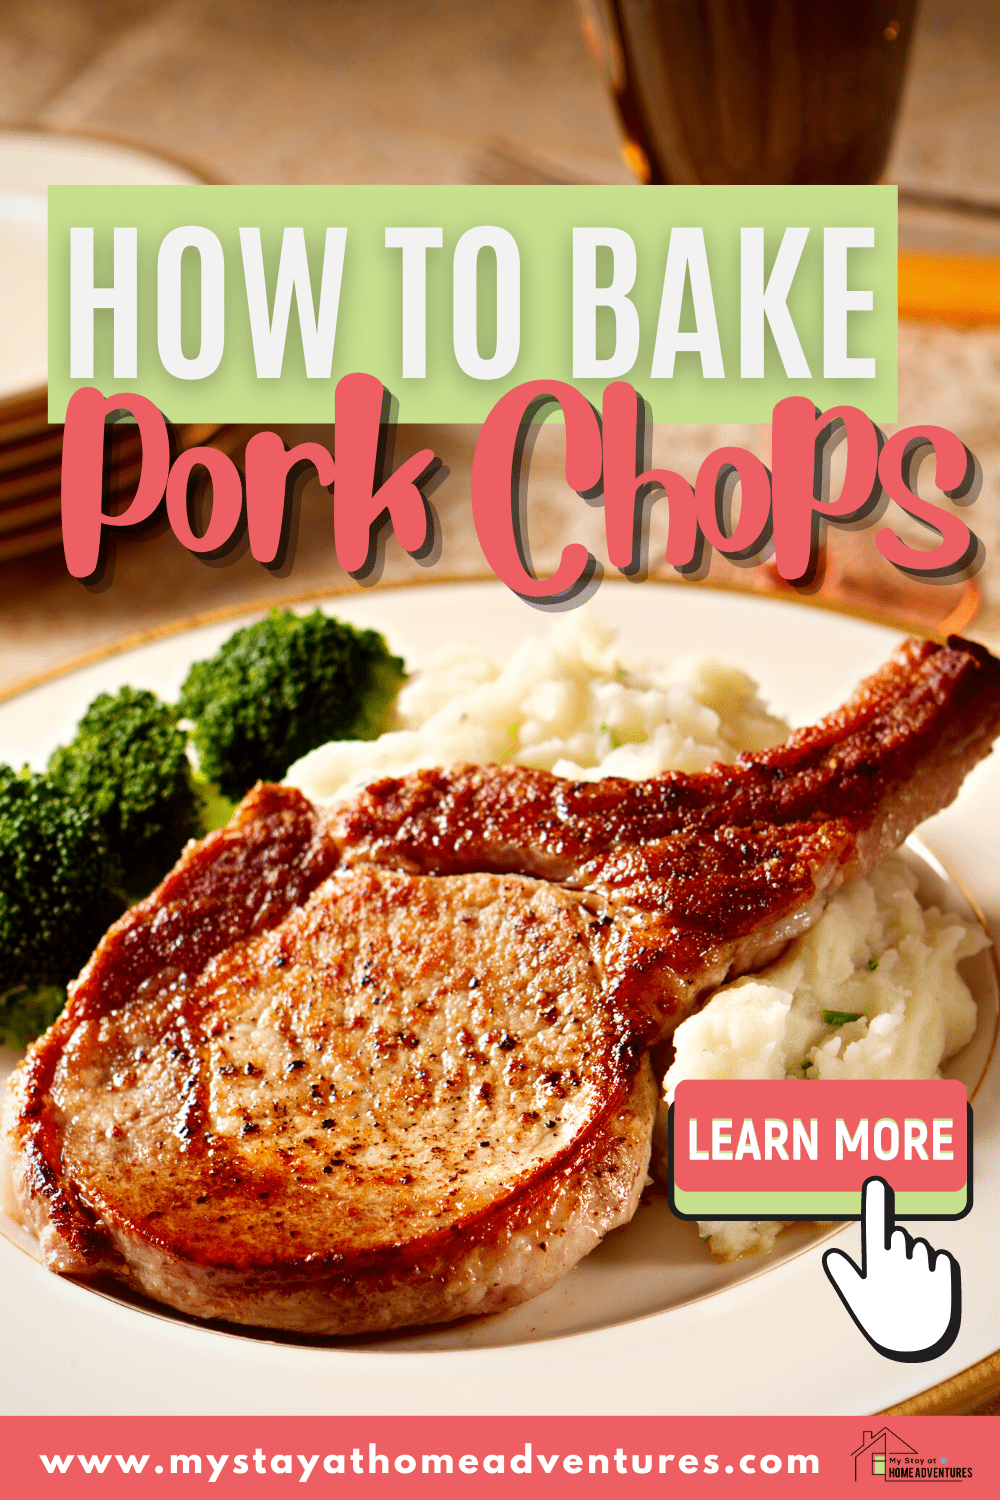 How to bake pork chops or how to cook pork chops in the oven is something that many new cooks wonder. Learn how to bake delicious juicy pork chops today. via @mystayathome